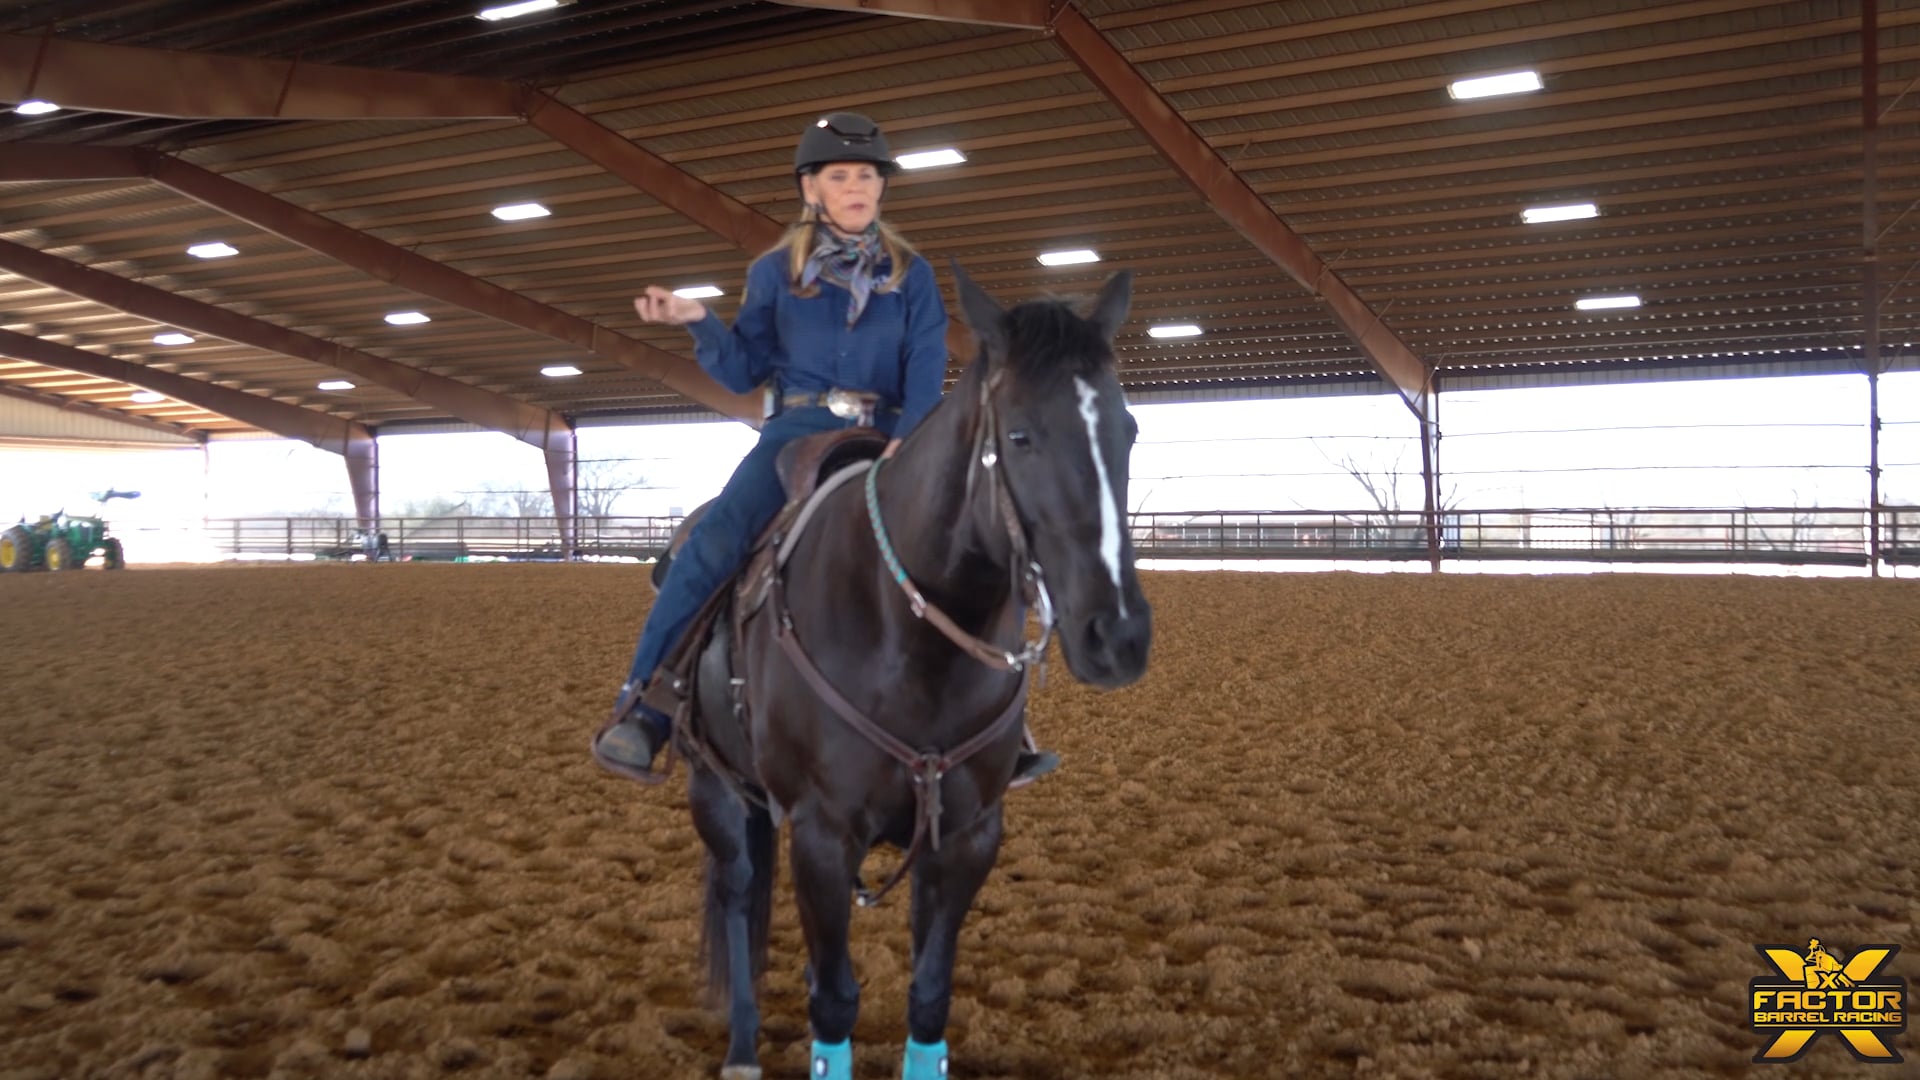 Dena 14 - Common Mistakes Riders Make When Warming Up For Competition